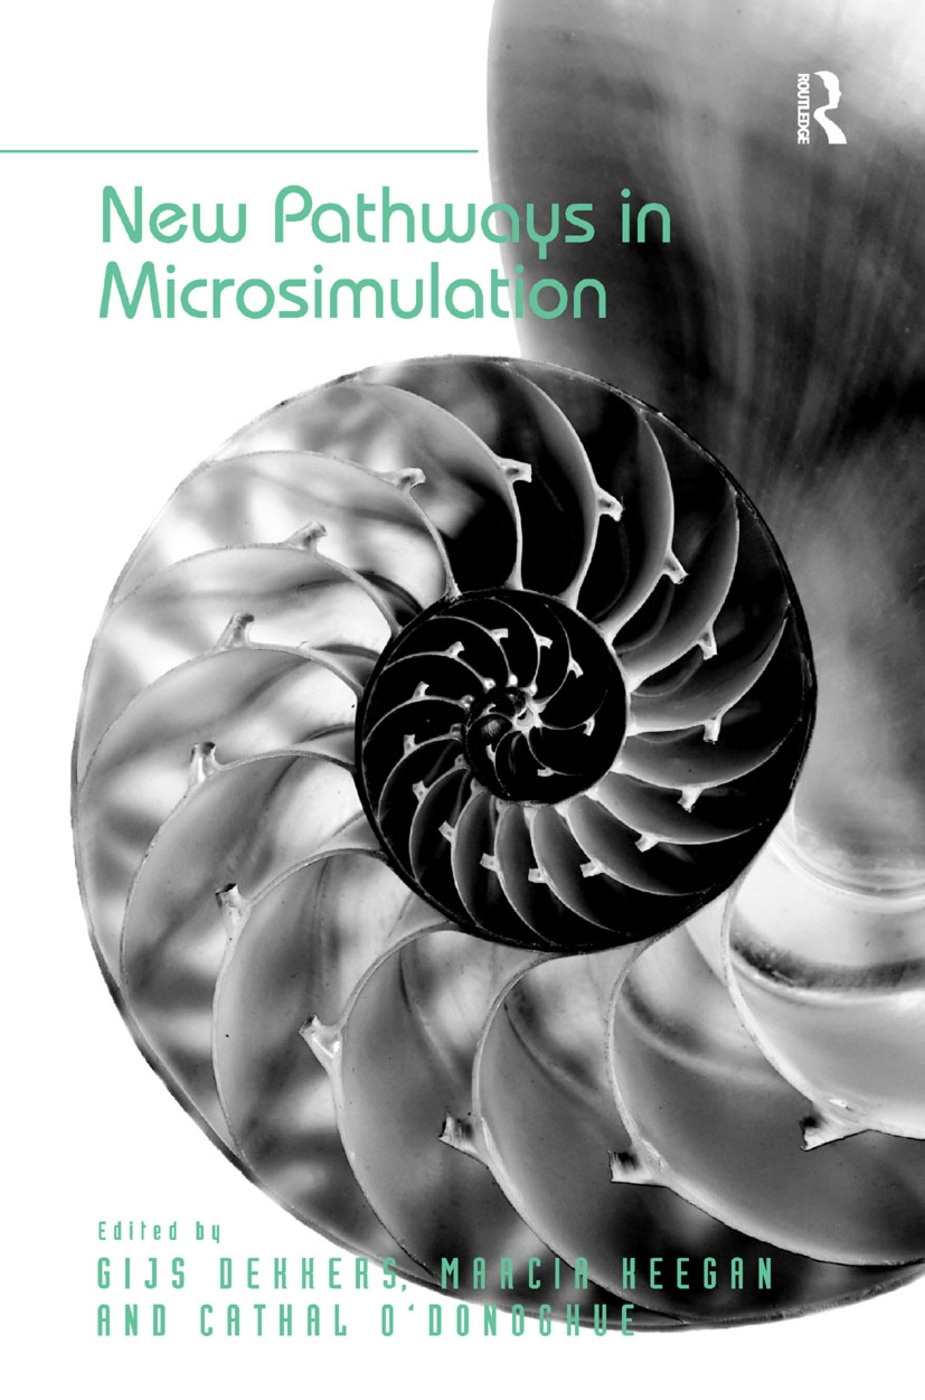 New Pathways in Microsimulation. by Gijs Dekkers, Marcia Keegan and Cathal O’Donoghue